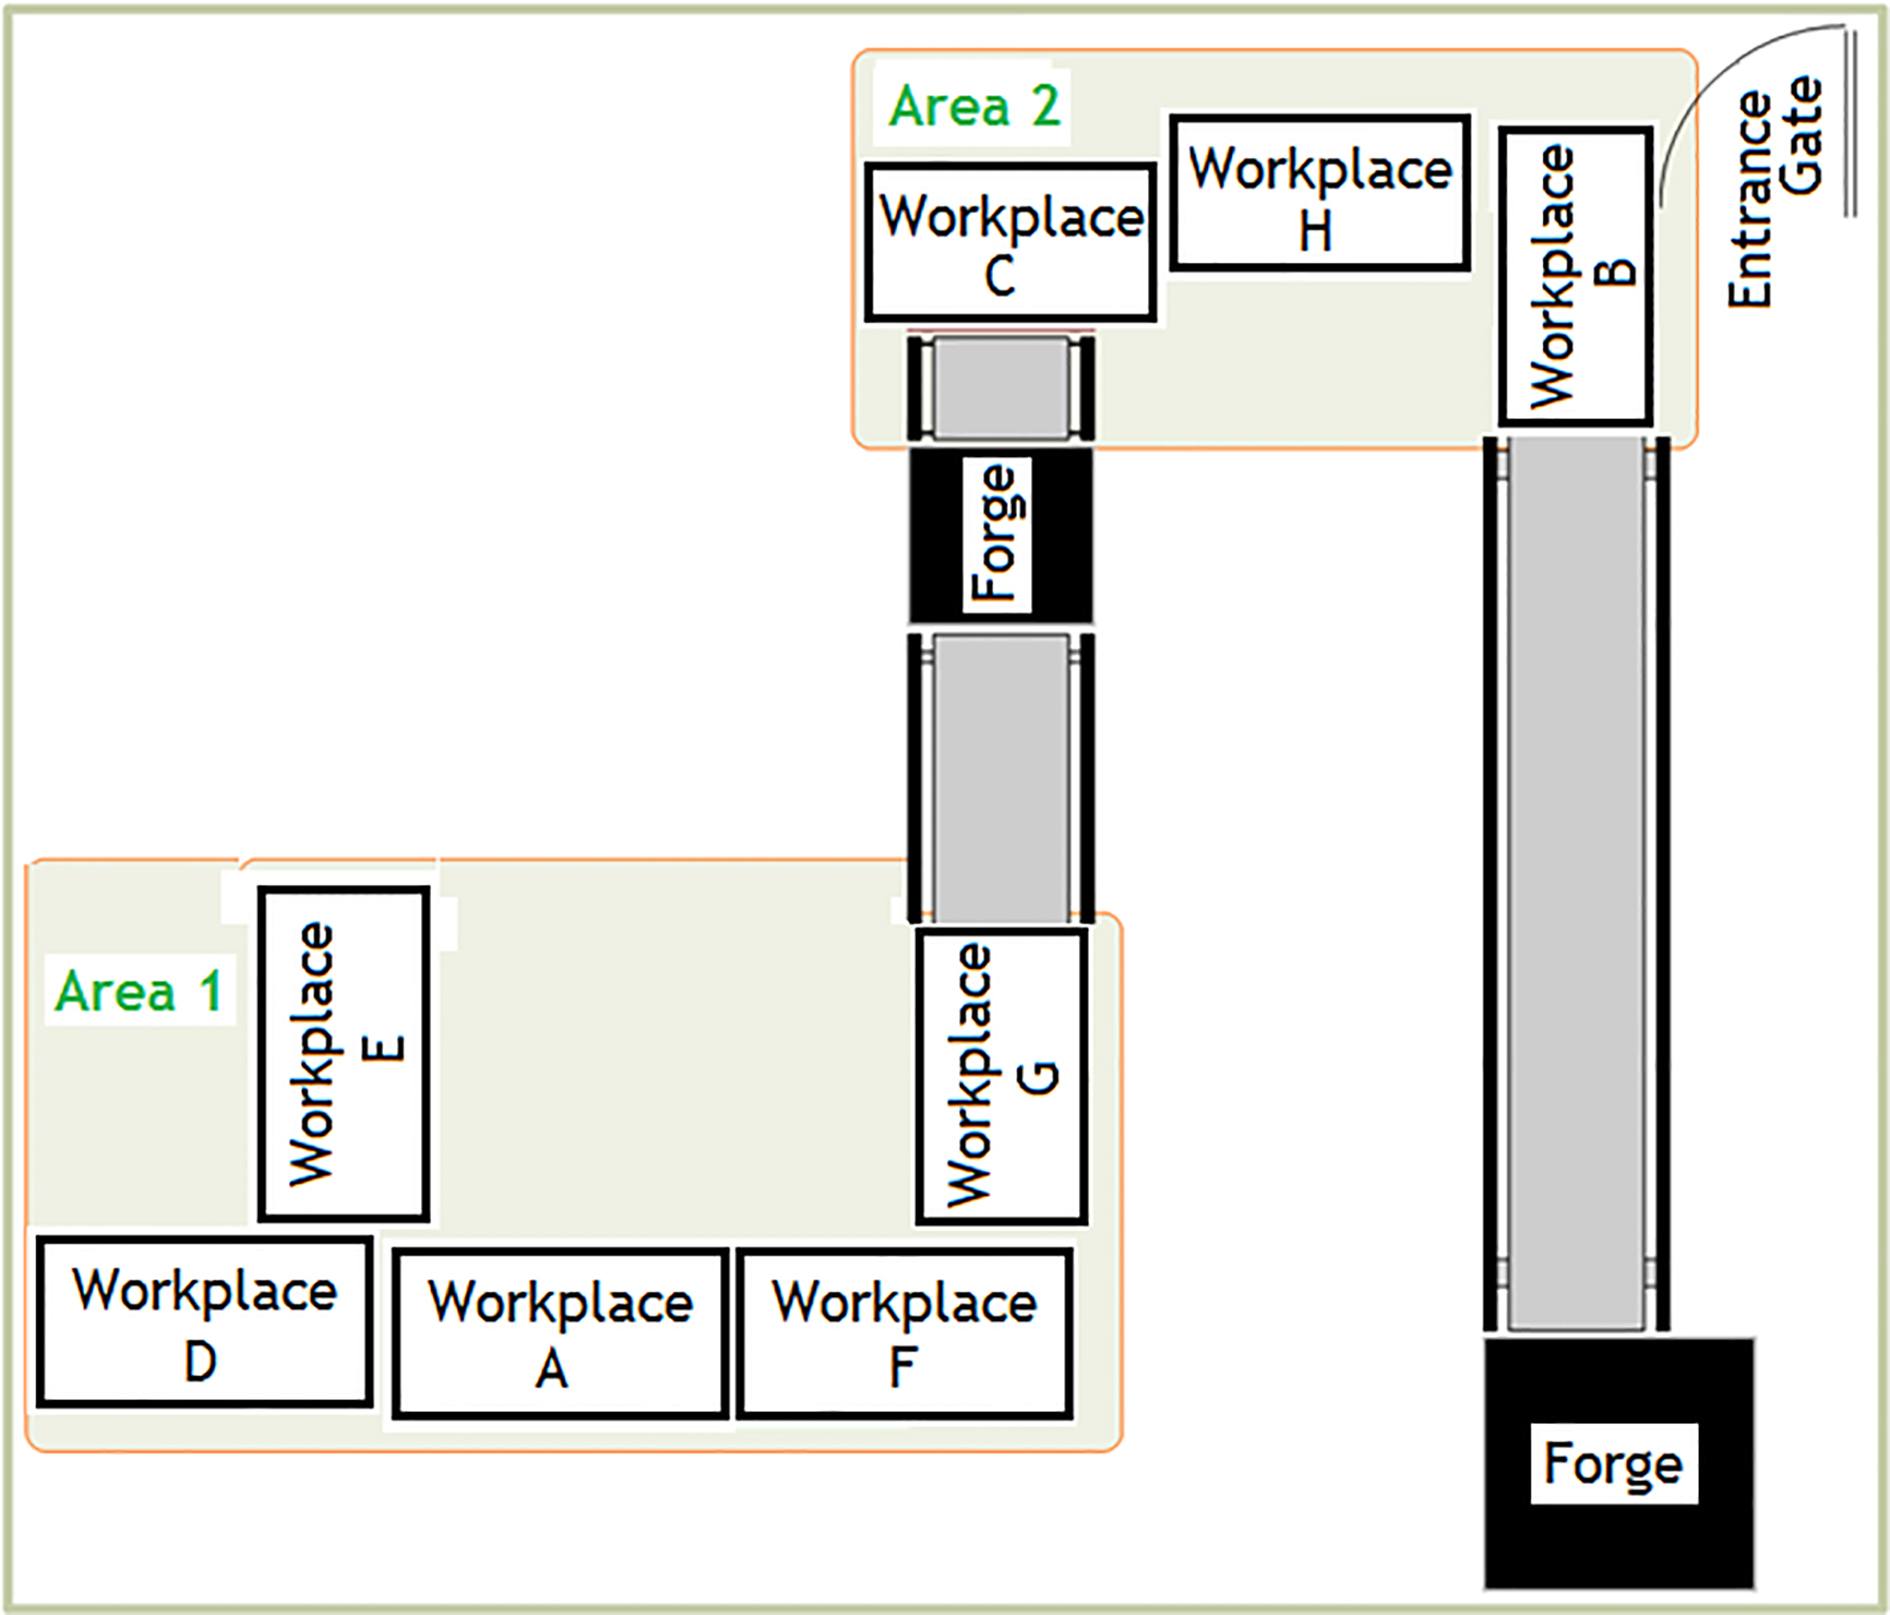 Layout of workstation in section studied.